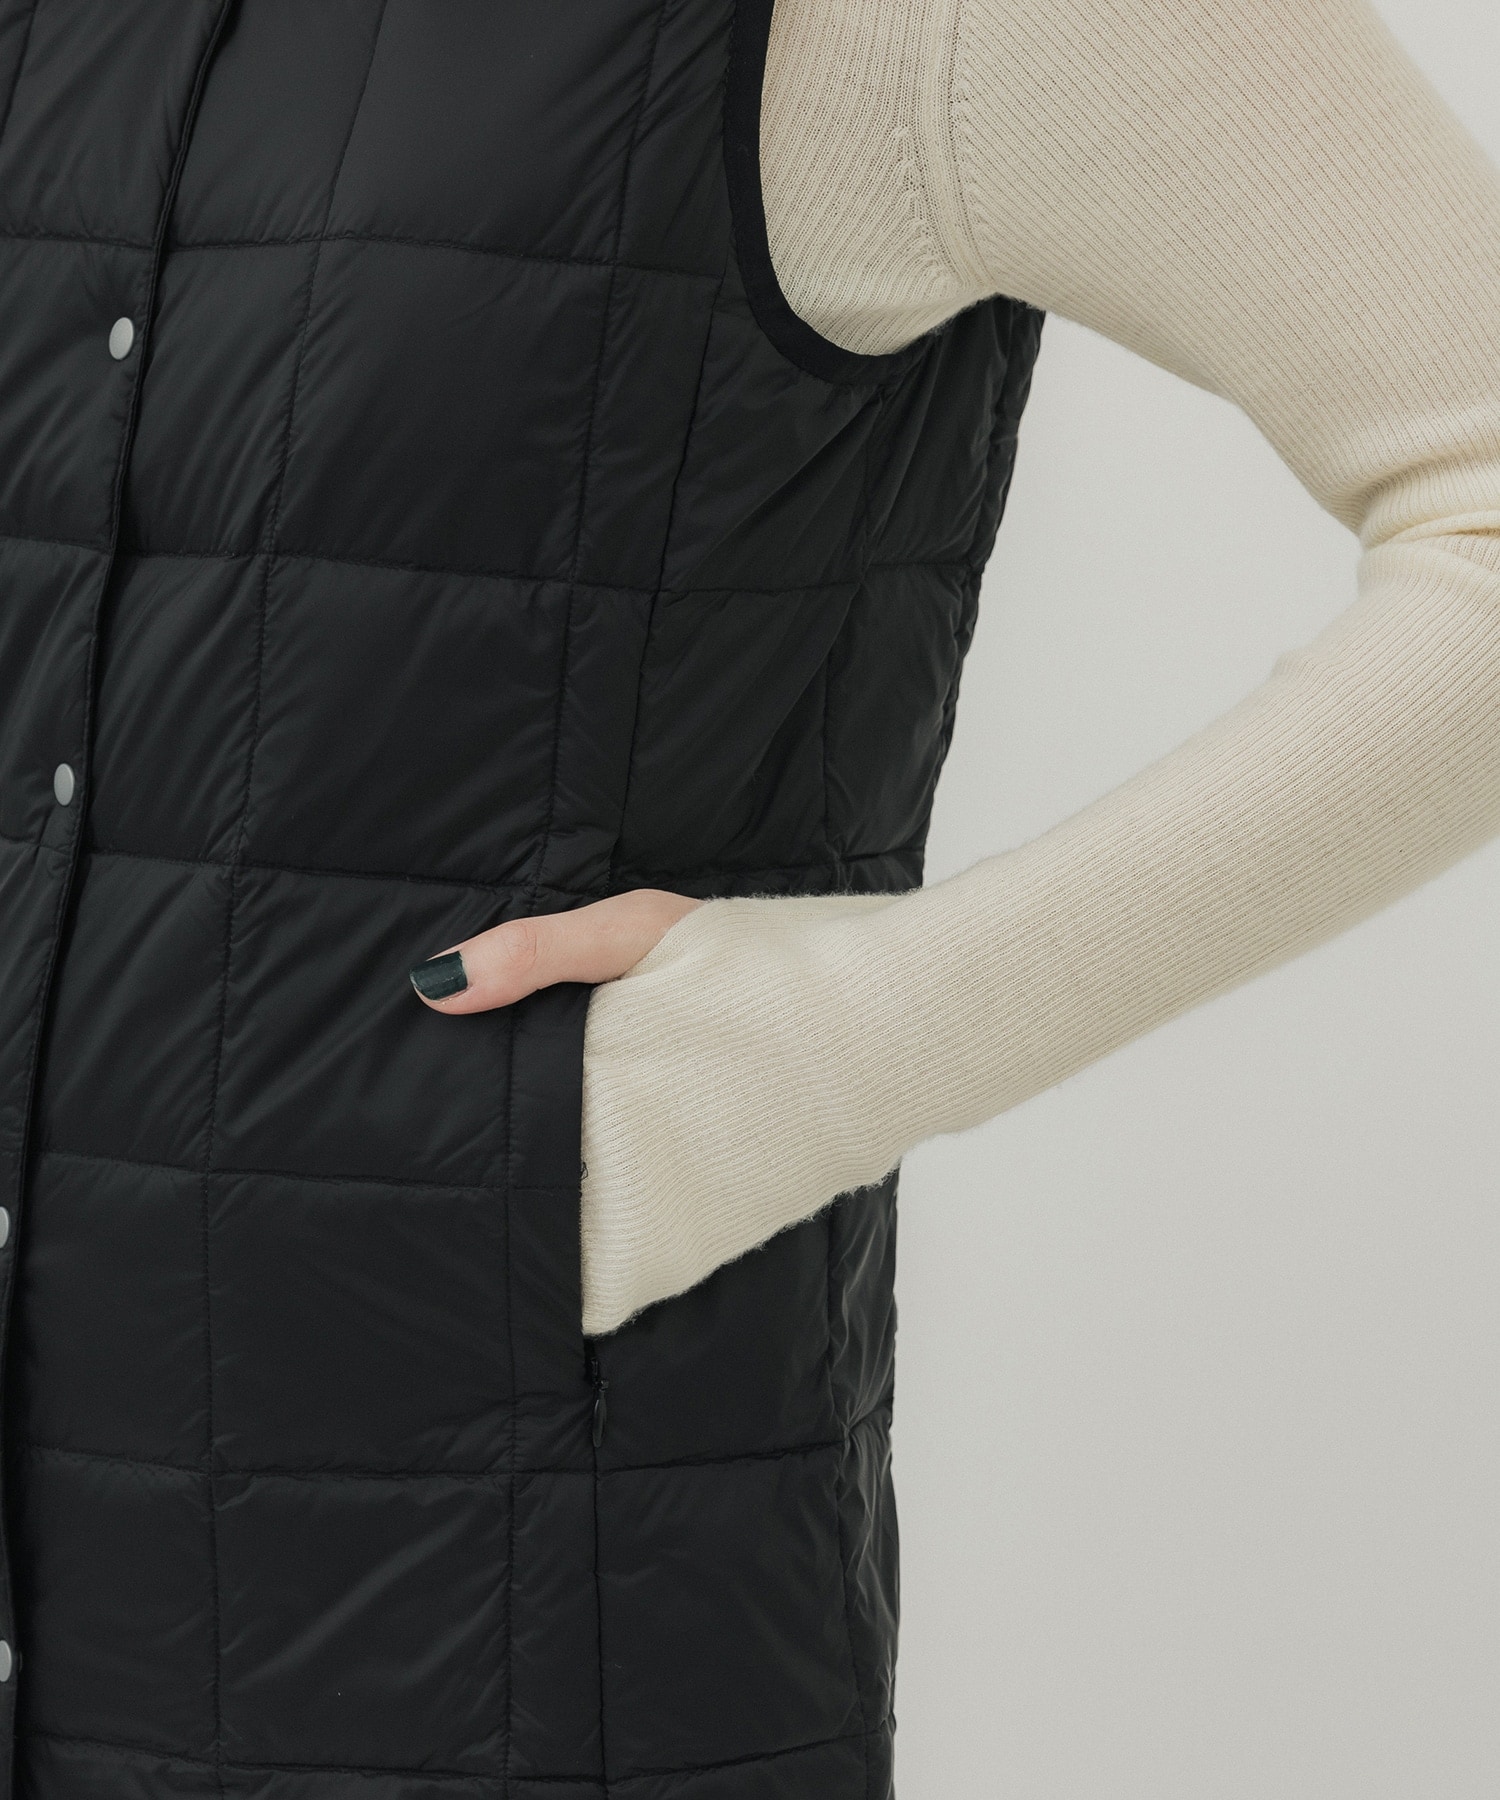 V NECK LONG DOWN VEST TAION/TAION EXTRA